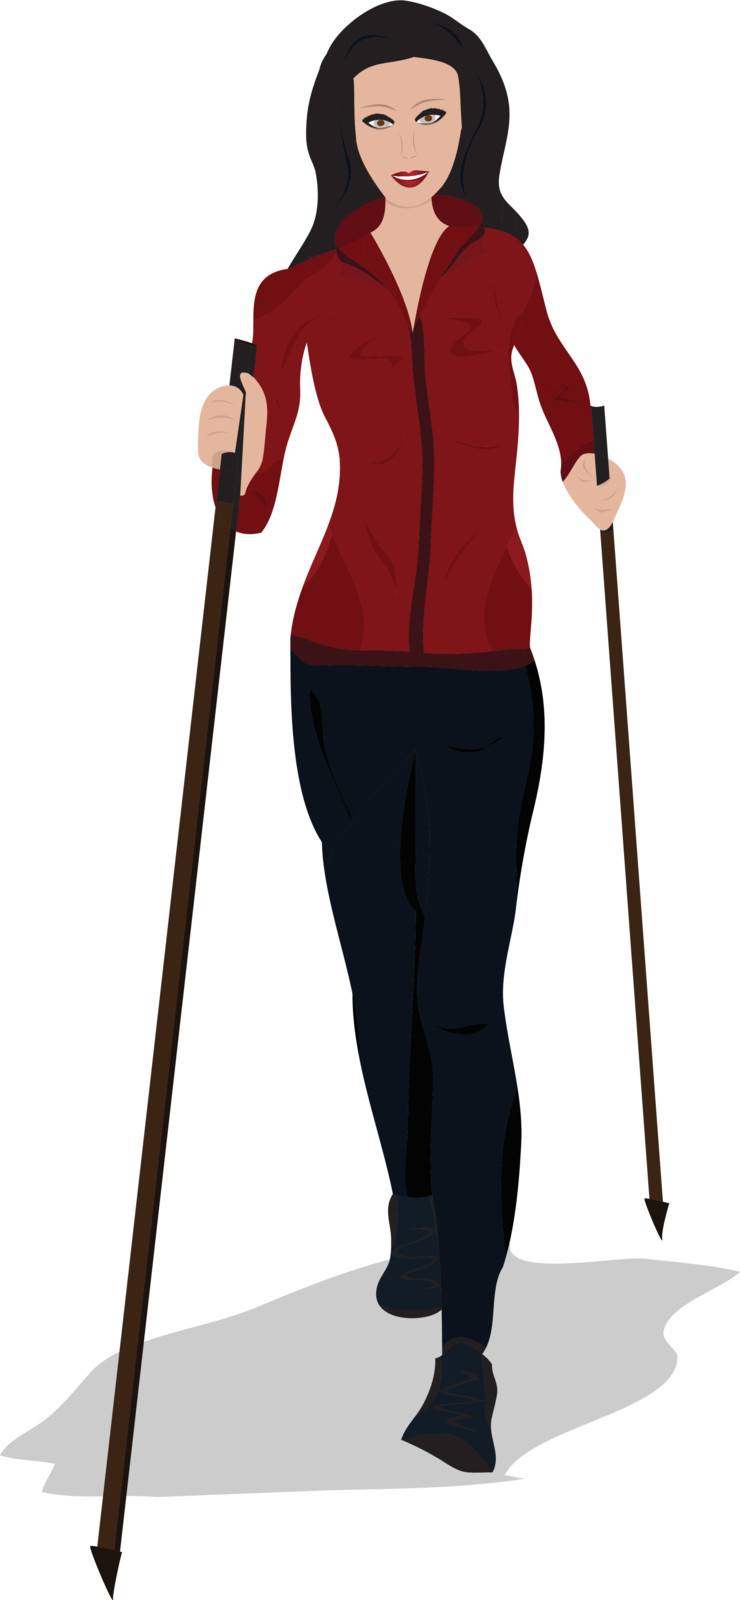 Vector illustration of a young woman practising nordic walking